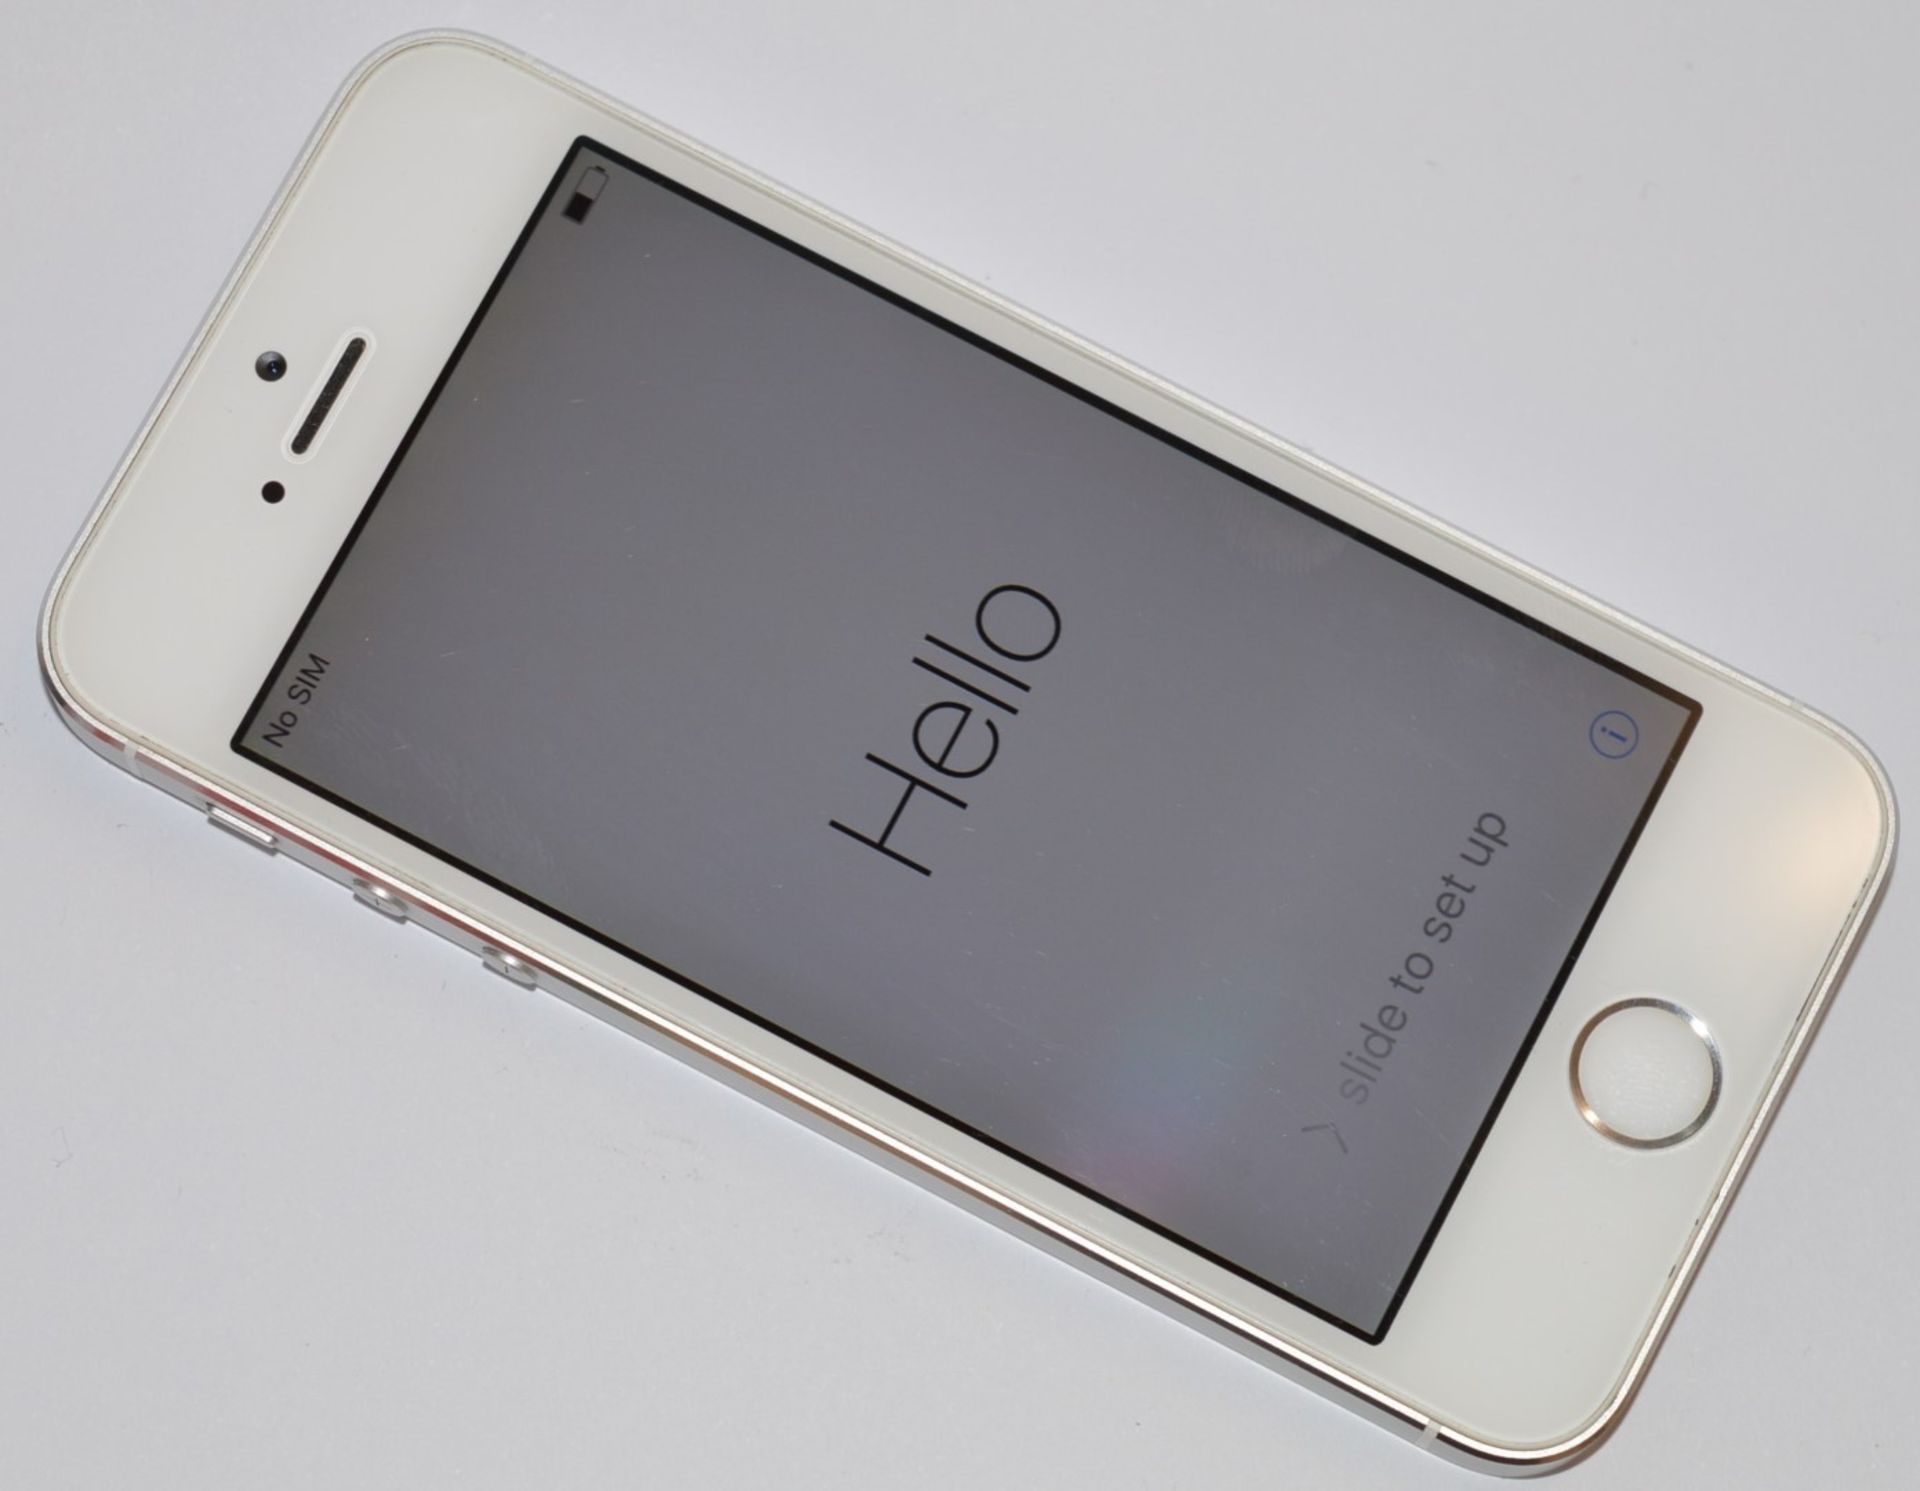 1 x Apple Iphone 5S White 32gb Mobile Phone - Model A1457 - Excellent Cosmetic Condition - Good - Image 2 of 15